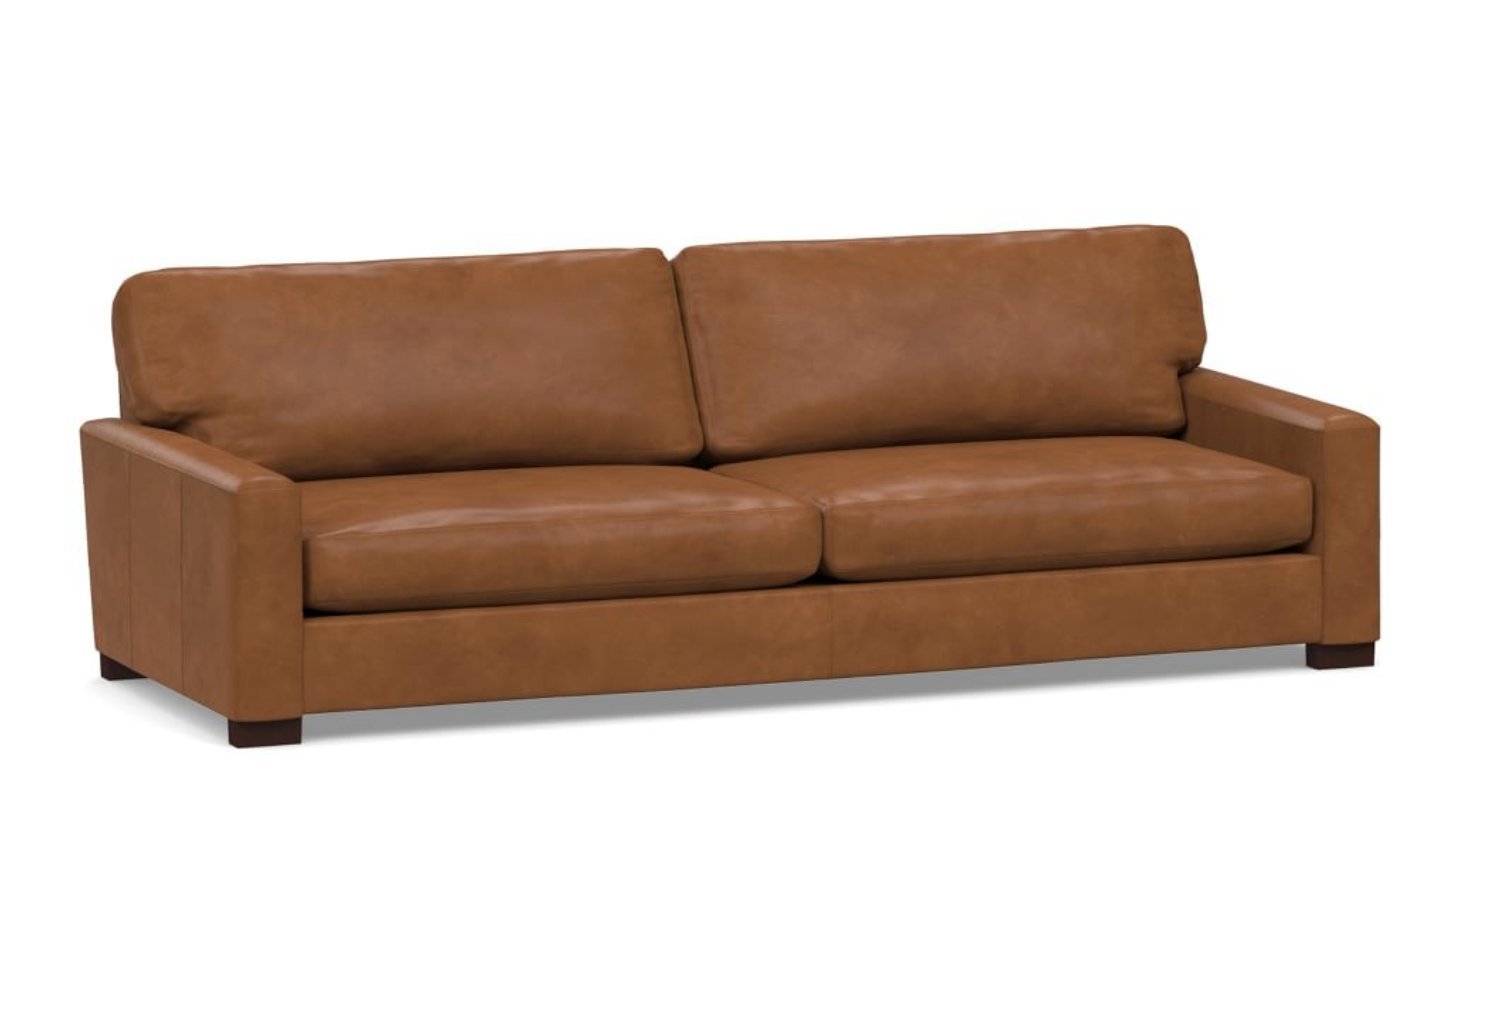 Turner Square Arm Leather Grand Sofa-2-Seater 103.5" without Nailheads, Down Blend Wrapped Cushions, Vintage Caramel - Image 0